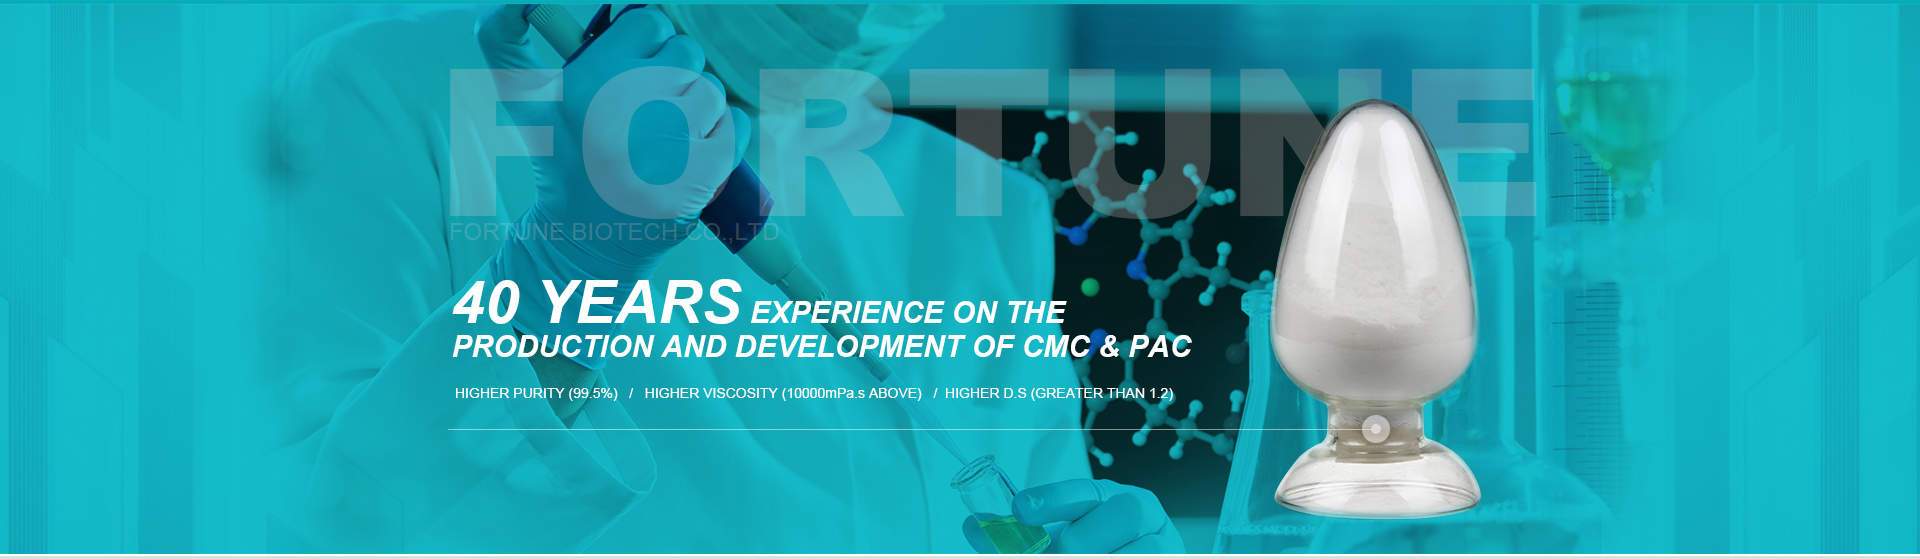 40 years' experience on the production and development of CMC&PAC